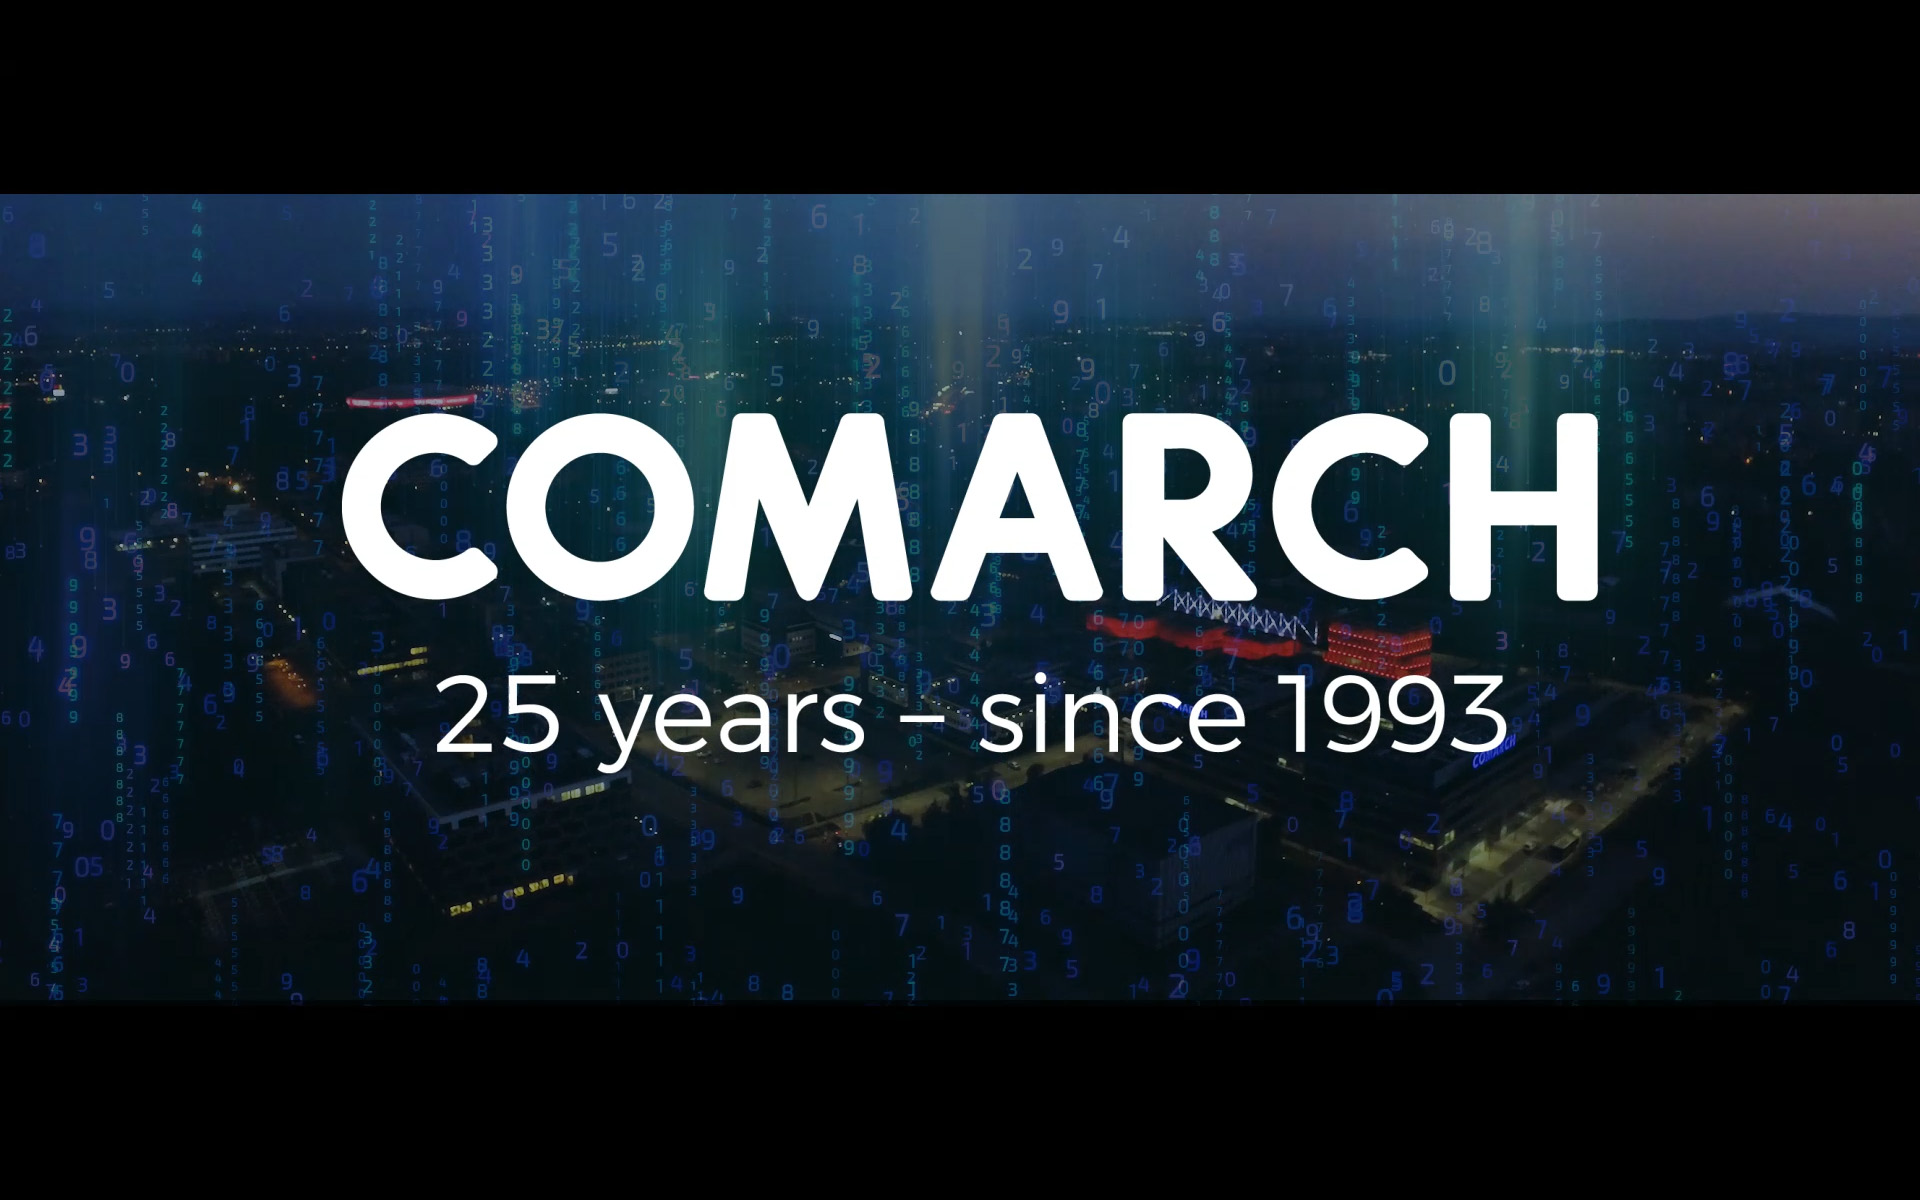 Comarch - 25 years